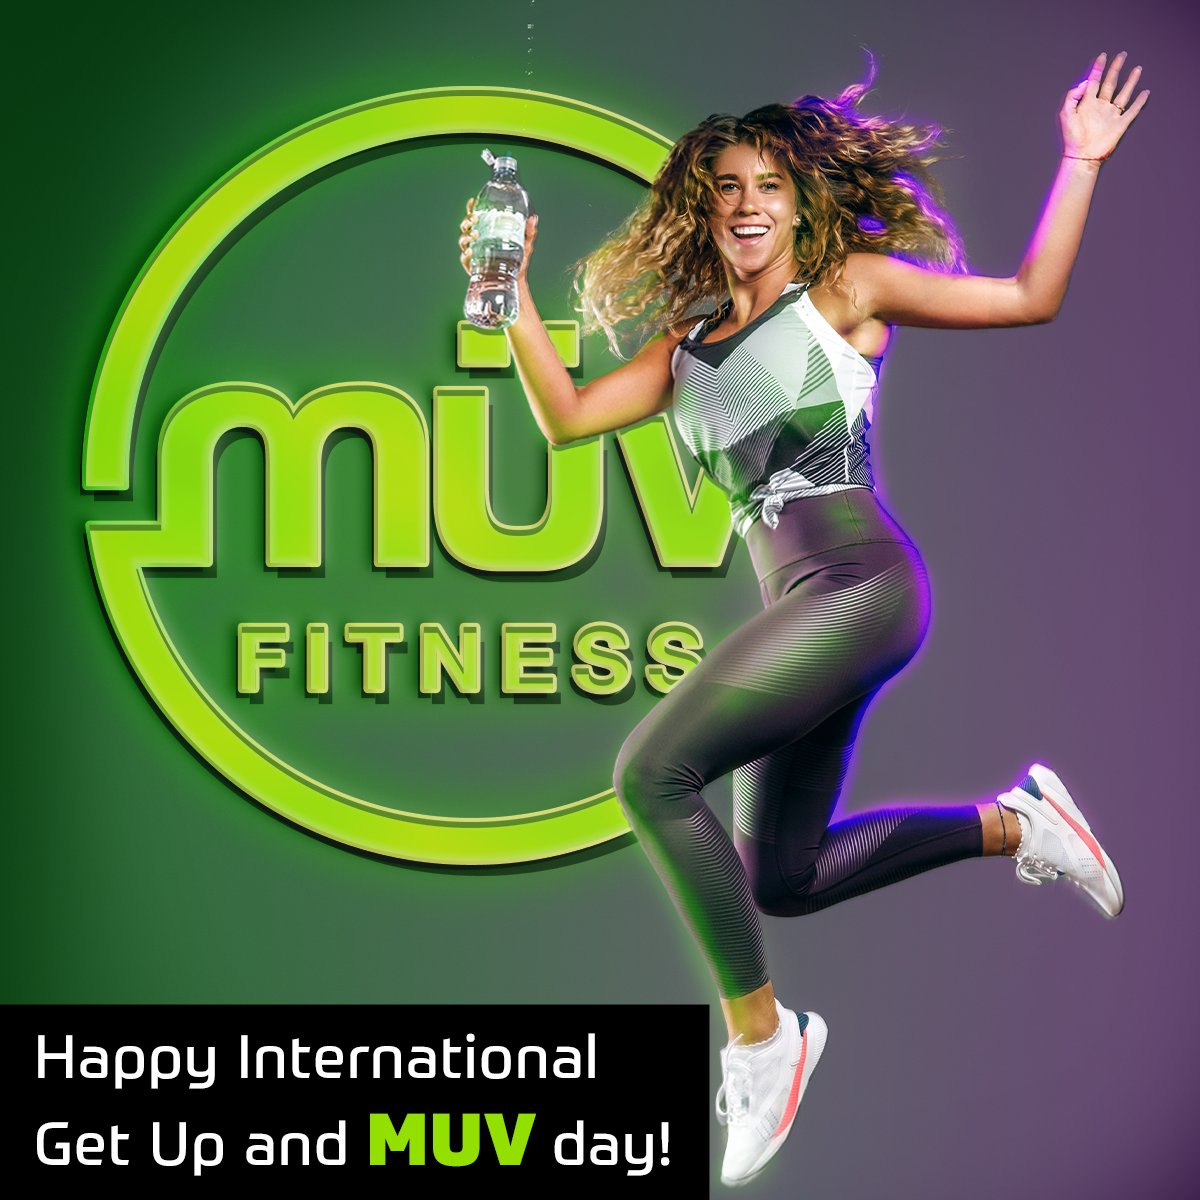 Today is National Get Up Day! It’s a great day to get up and Muv. How are you Muving today?

#internationalgetupandmoveday #getupandmoveday #getupandmove #muvfitness